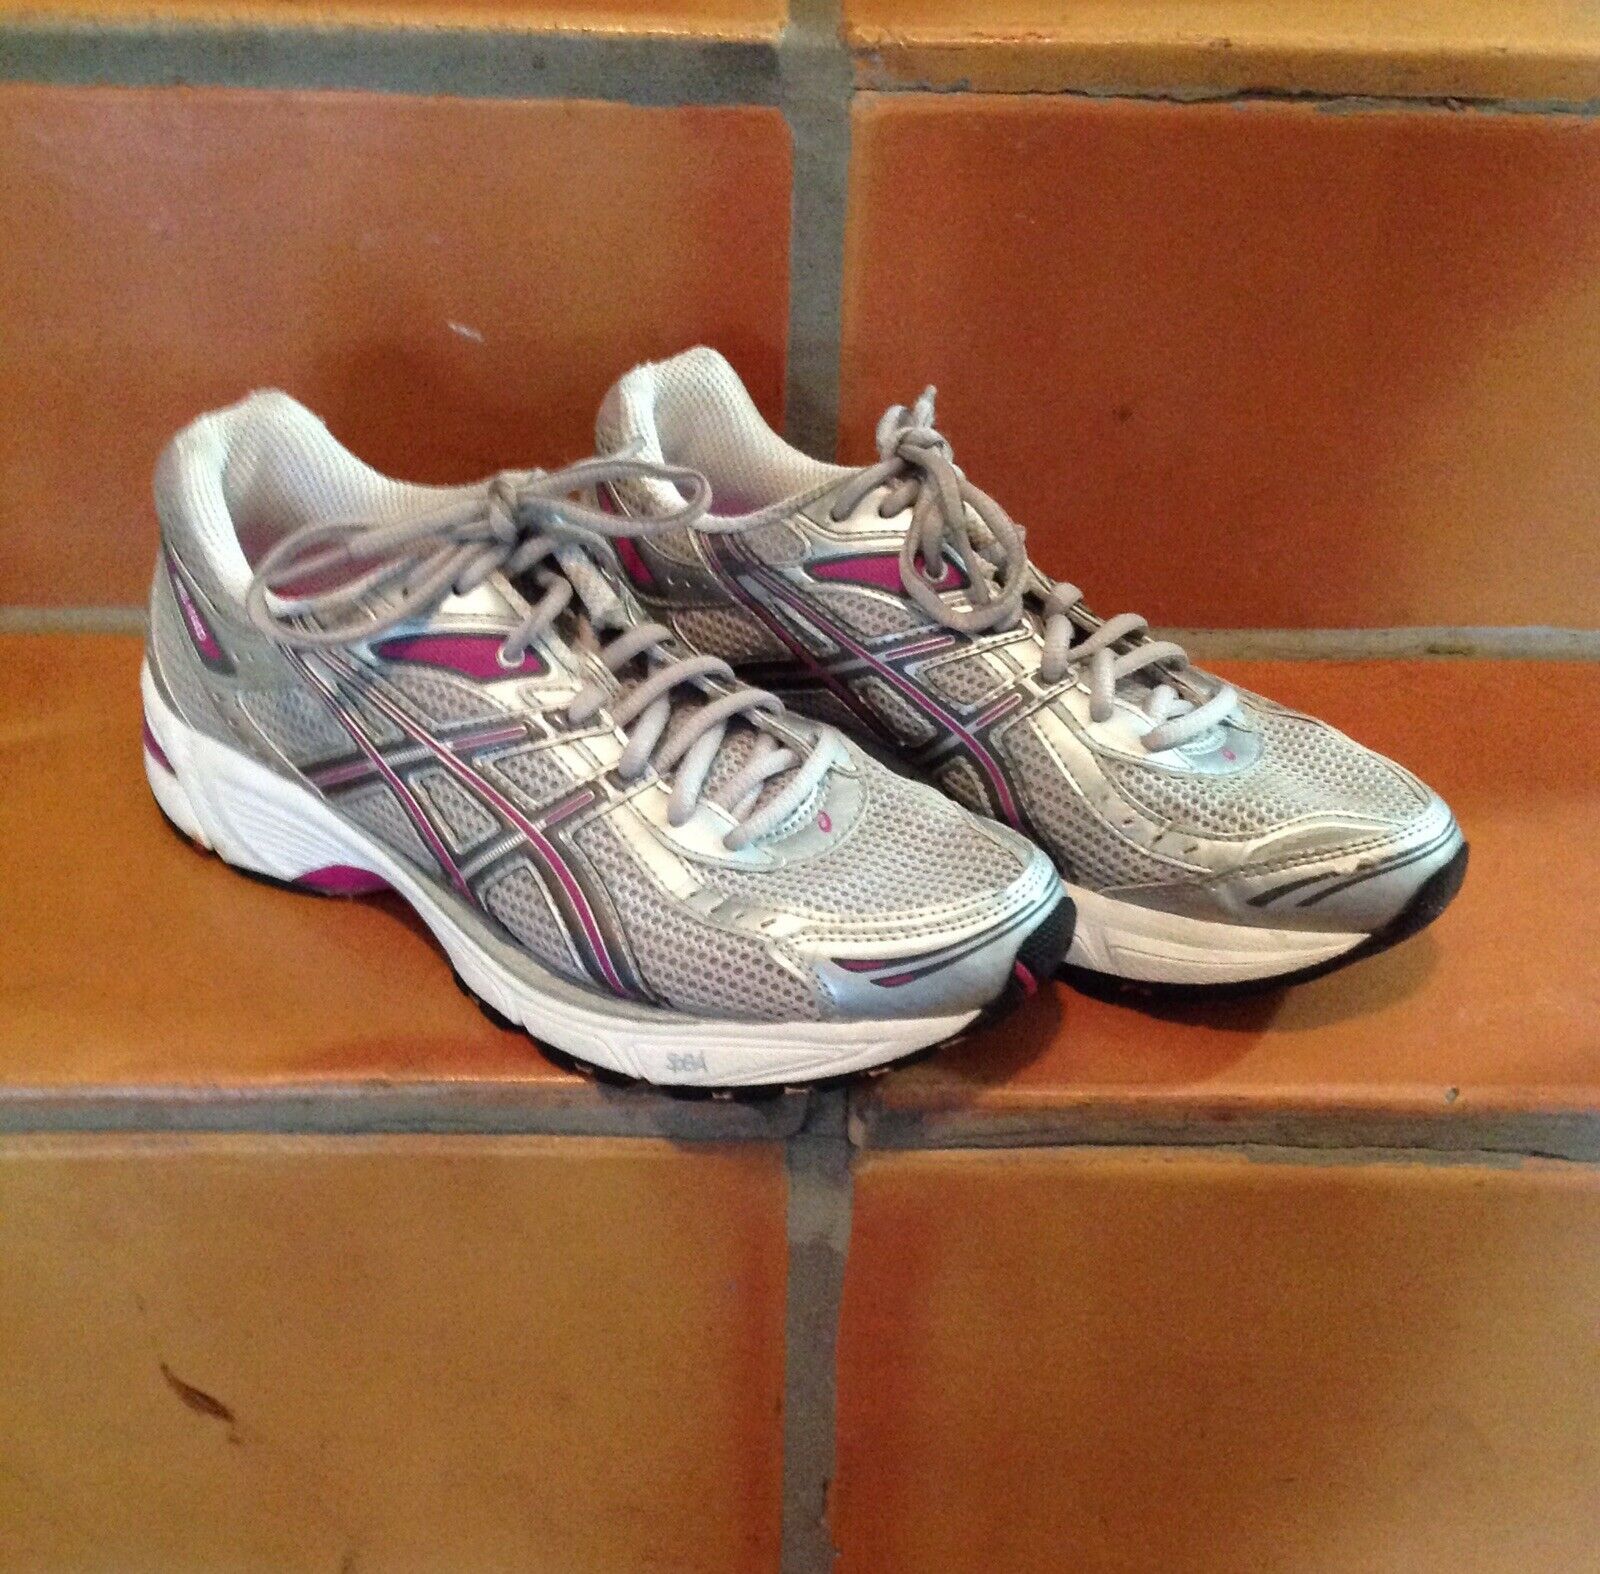 asics silver running shoes